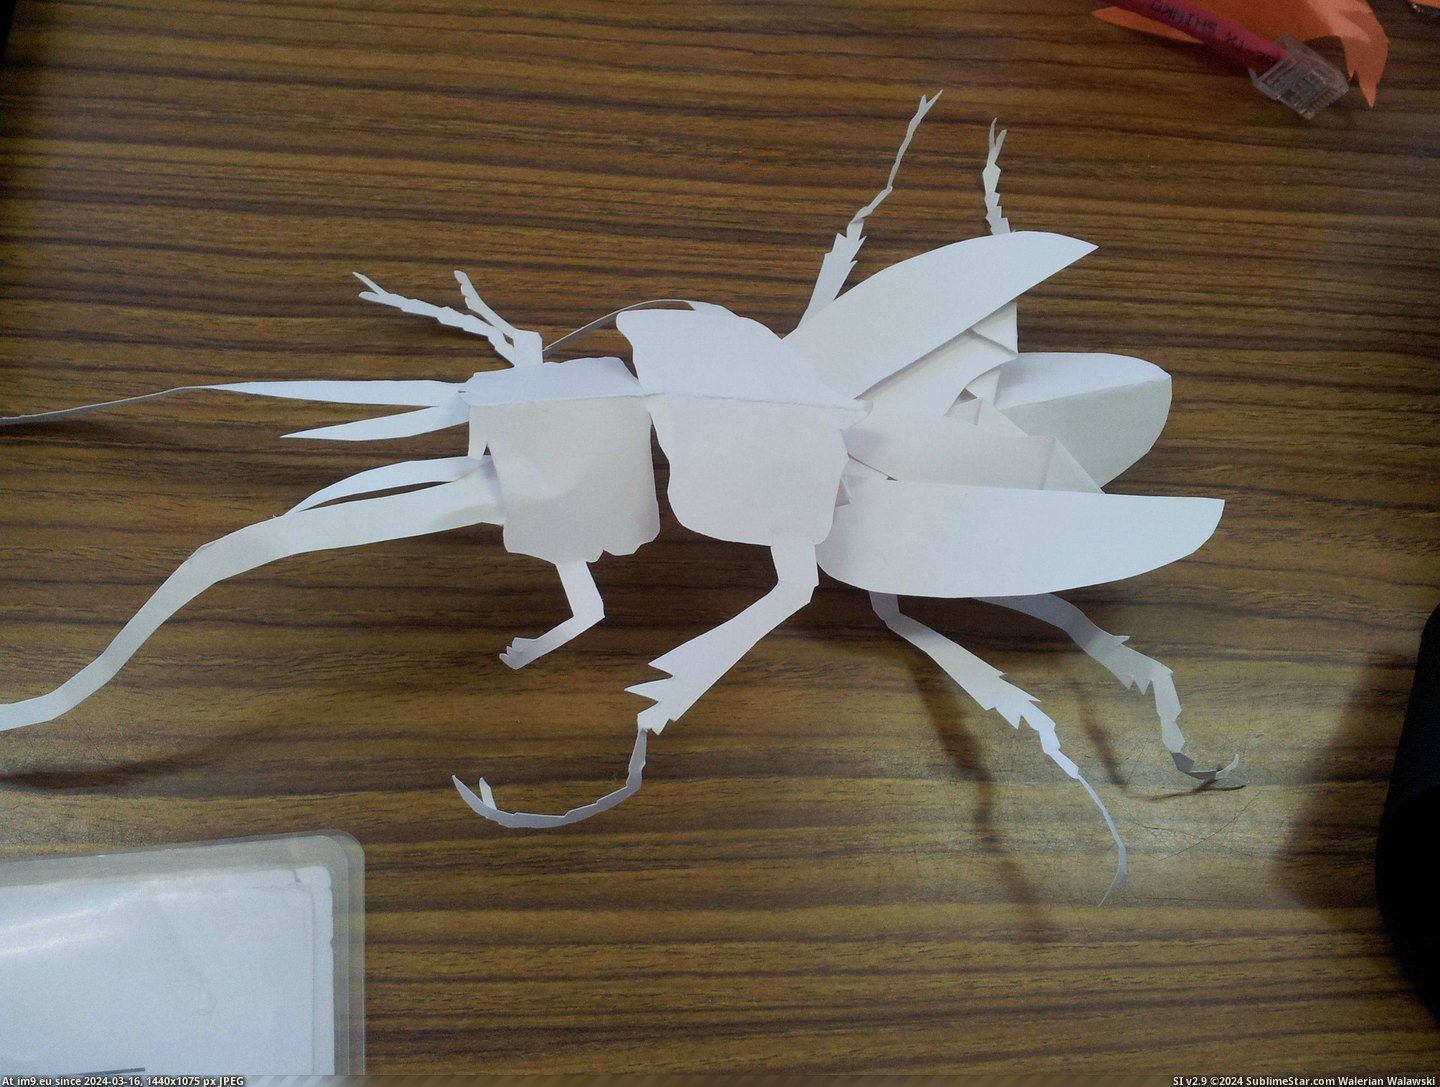 #One #Paper #Students #Creatures #Freehand #Bored #Completely [Pics] One of my students makes these creatures out of paper completely freehand whenever he is bored 1 Pic. (Obraz z album My r/PICS favs))